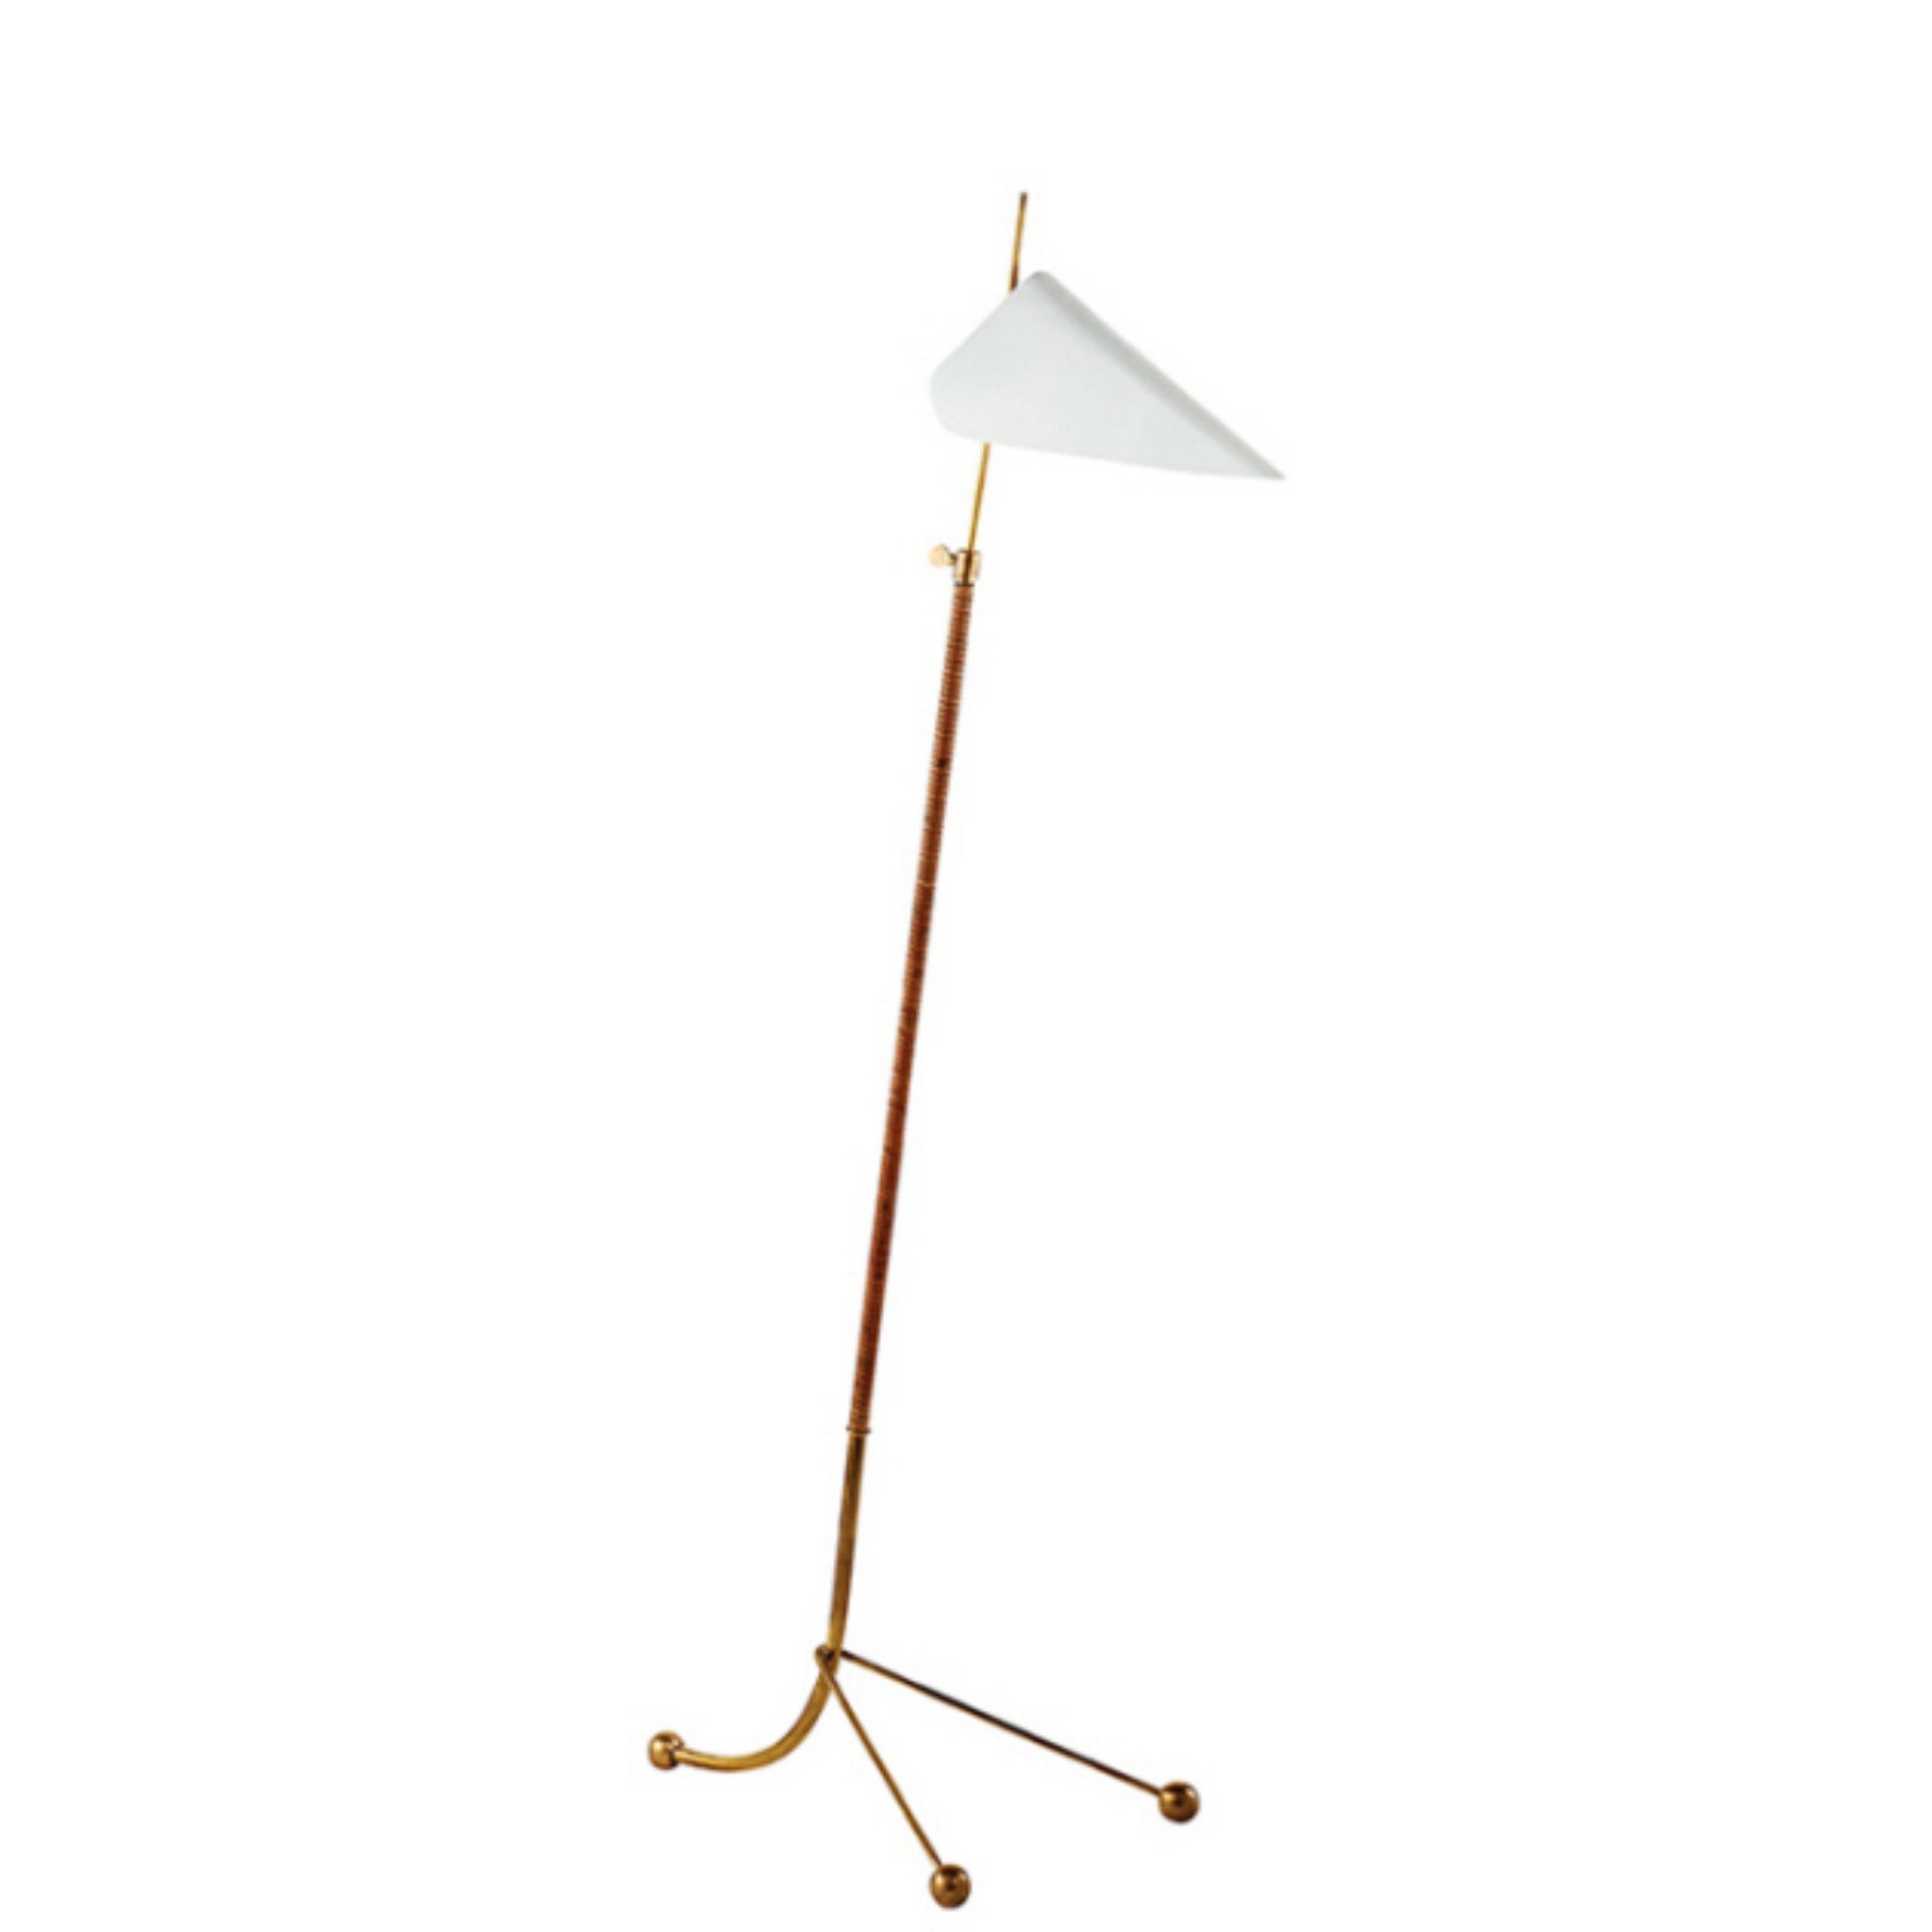 AERIN Moresby Floor Lamp in Hand-Rubbed Antique Brass with White Shade